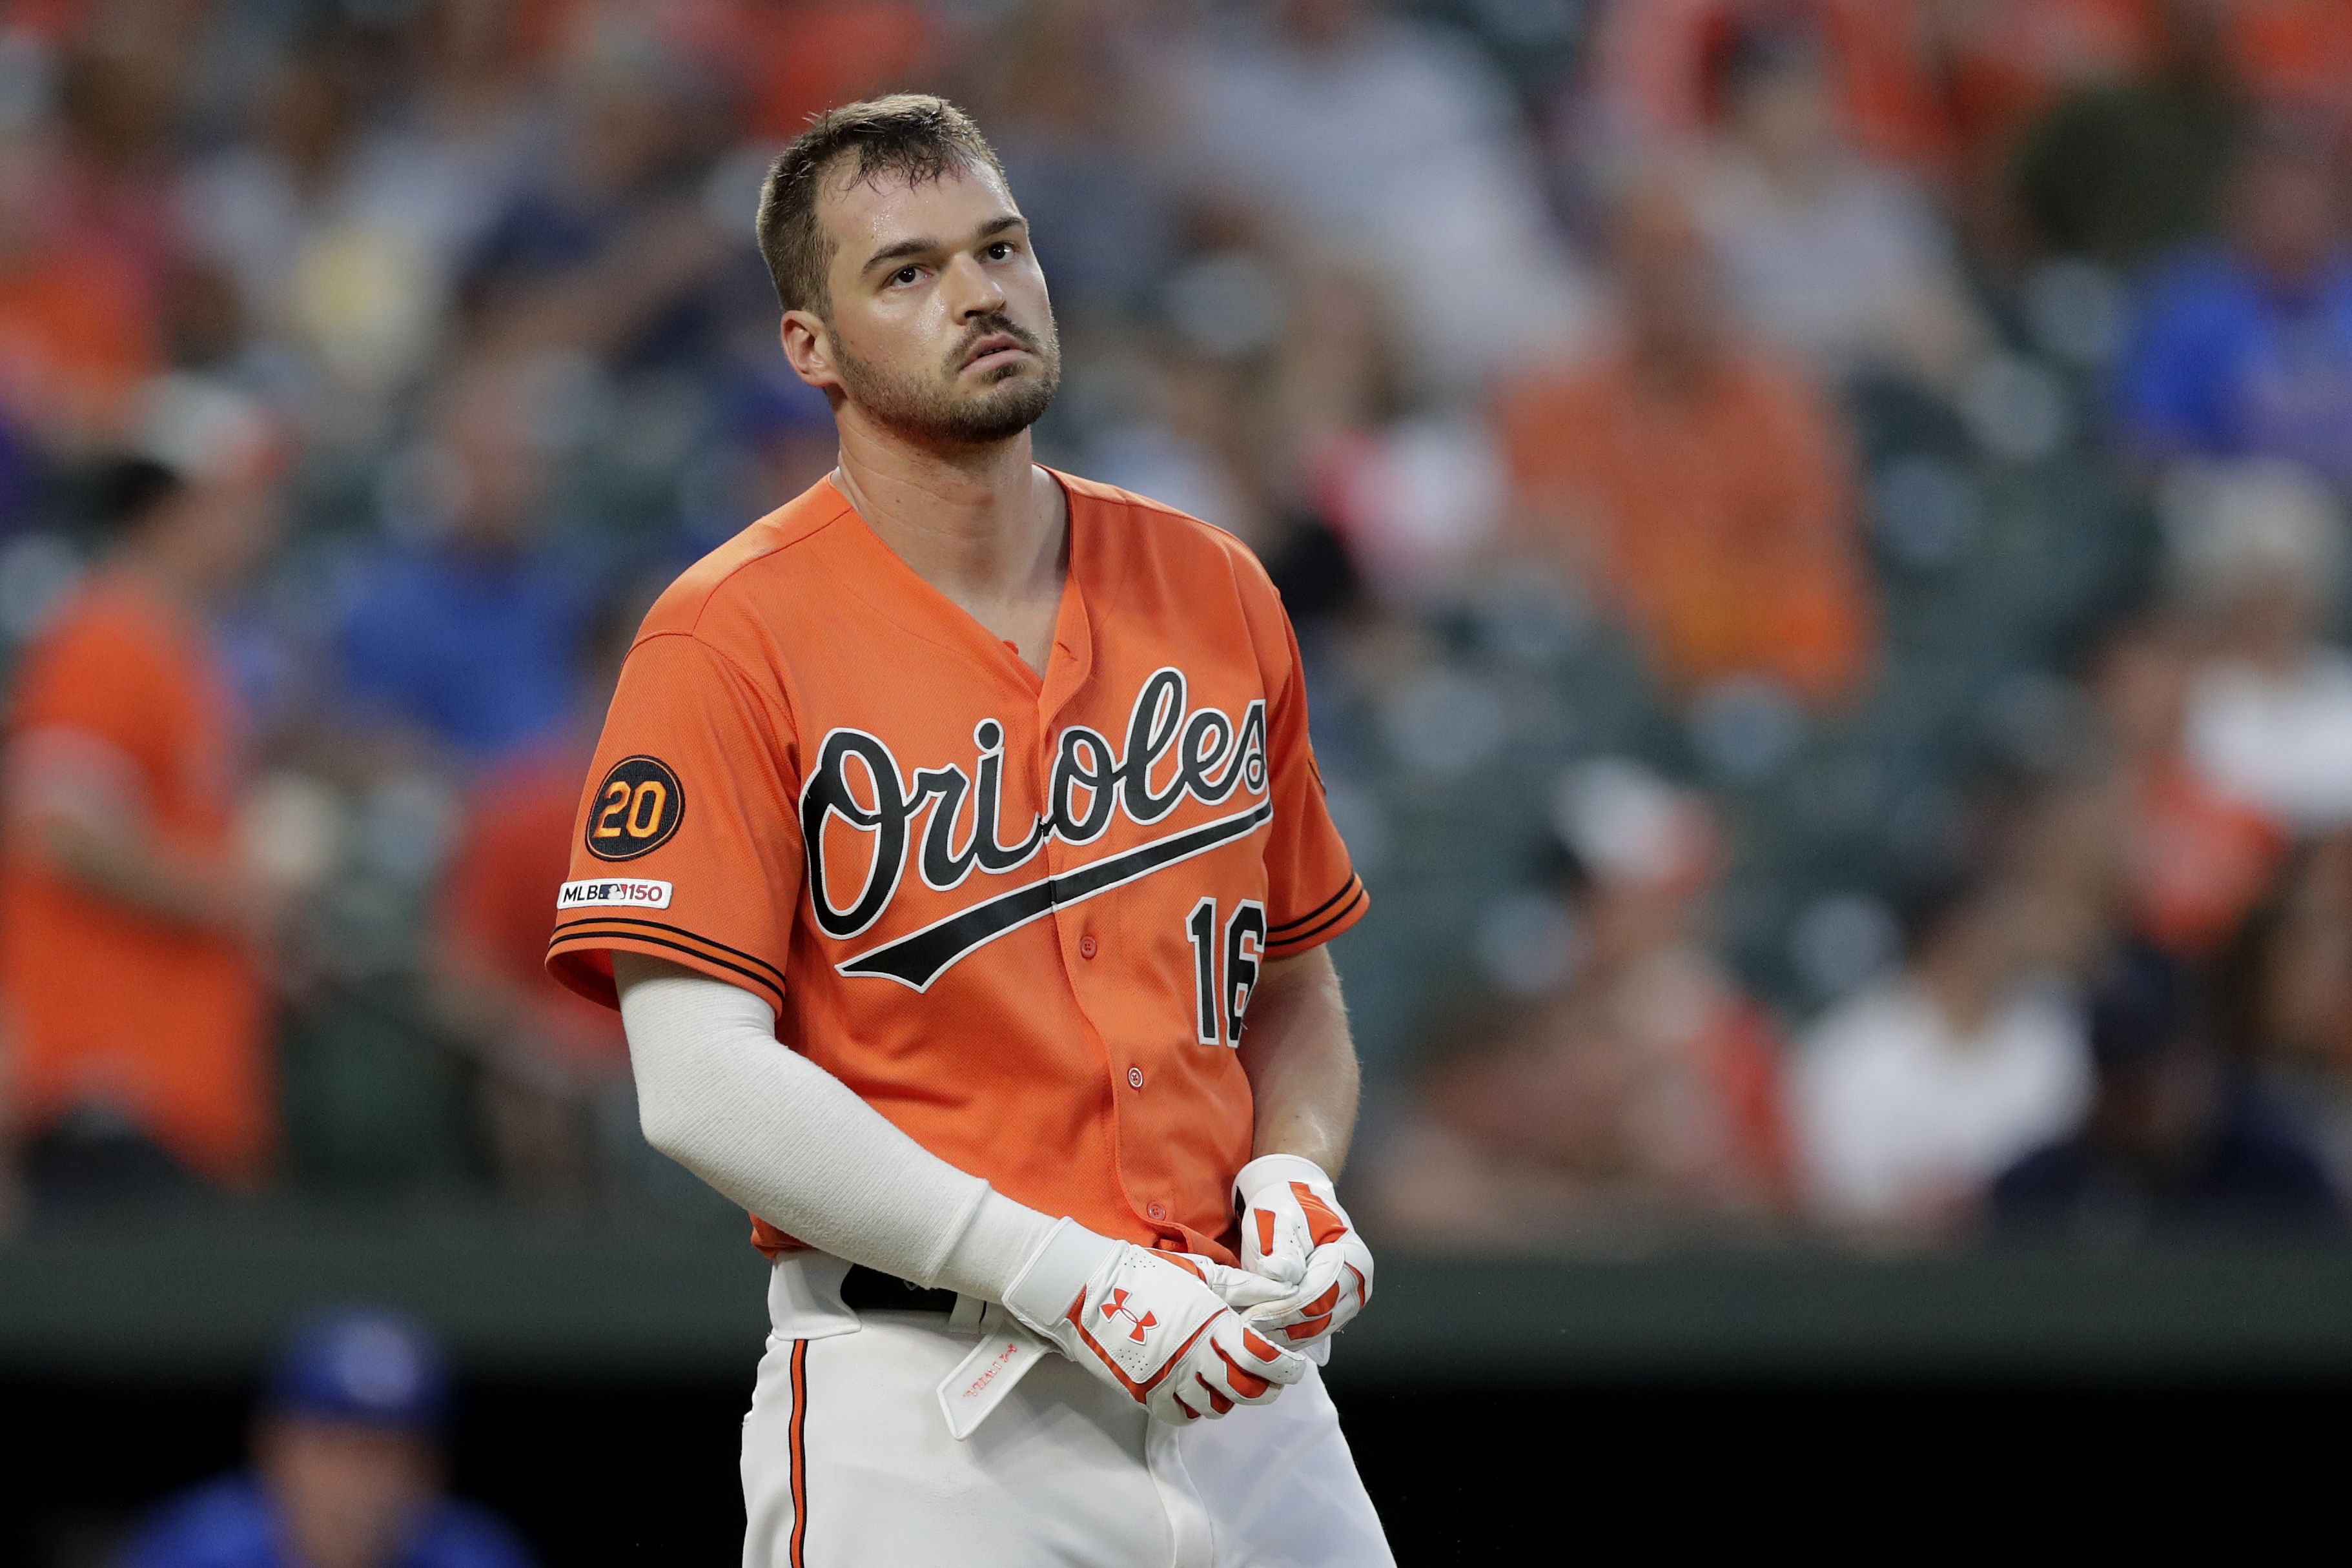 ESPN on X: In 2020, Trey Mancini was diagnosed with cancer. In